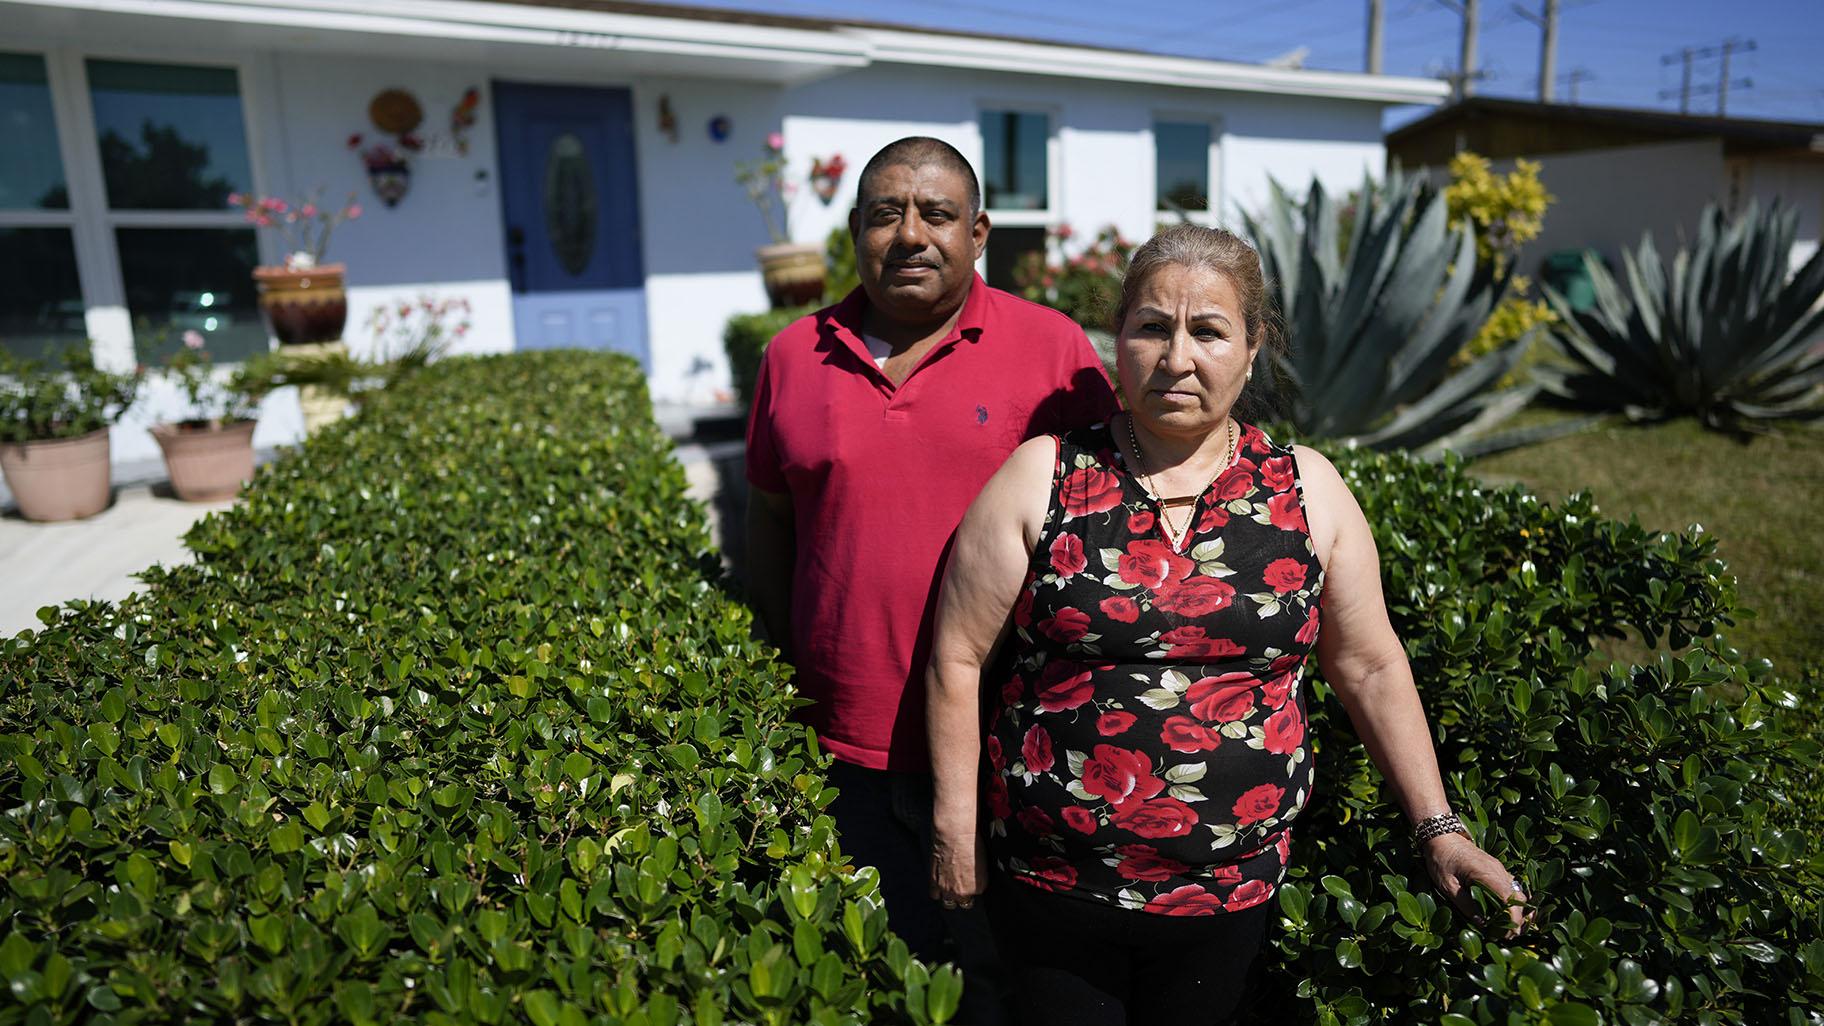 Rosalinda Ramirez, 57, and her partner Jose Guerrero, 41, Mexican immigrants who crossed the border separately over two decades ago and who have built lives and he a landscaping business in the U.S. but never found a route to obtain legal status, pose for a picture outside their home in Homestead, Fla., Tuesday, Nov. 7, 2023. (AP Photo / Rebecca Blackwell)